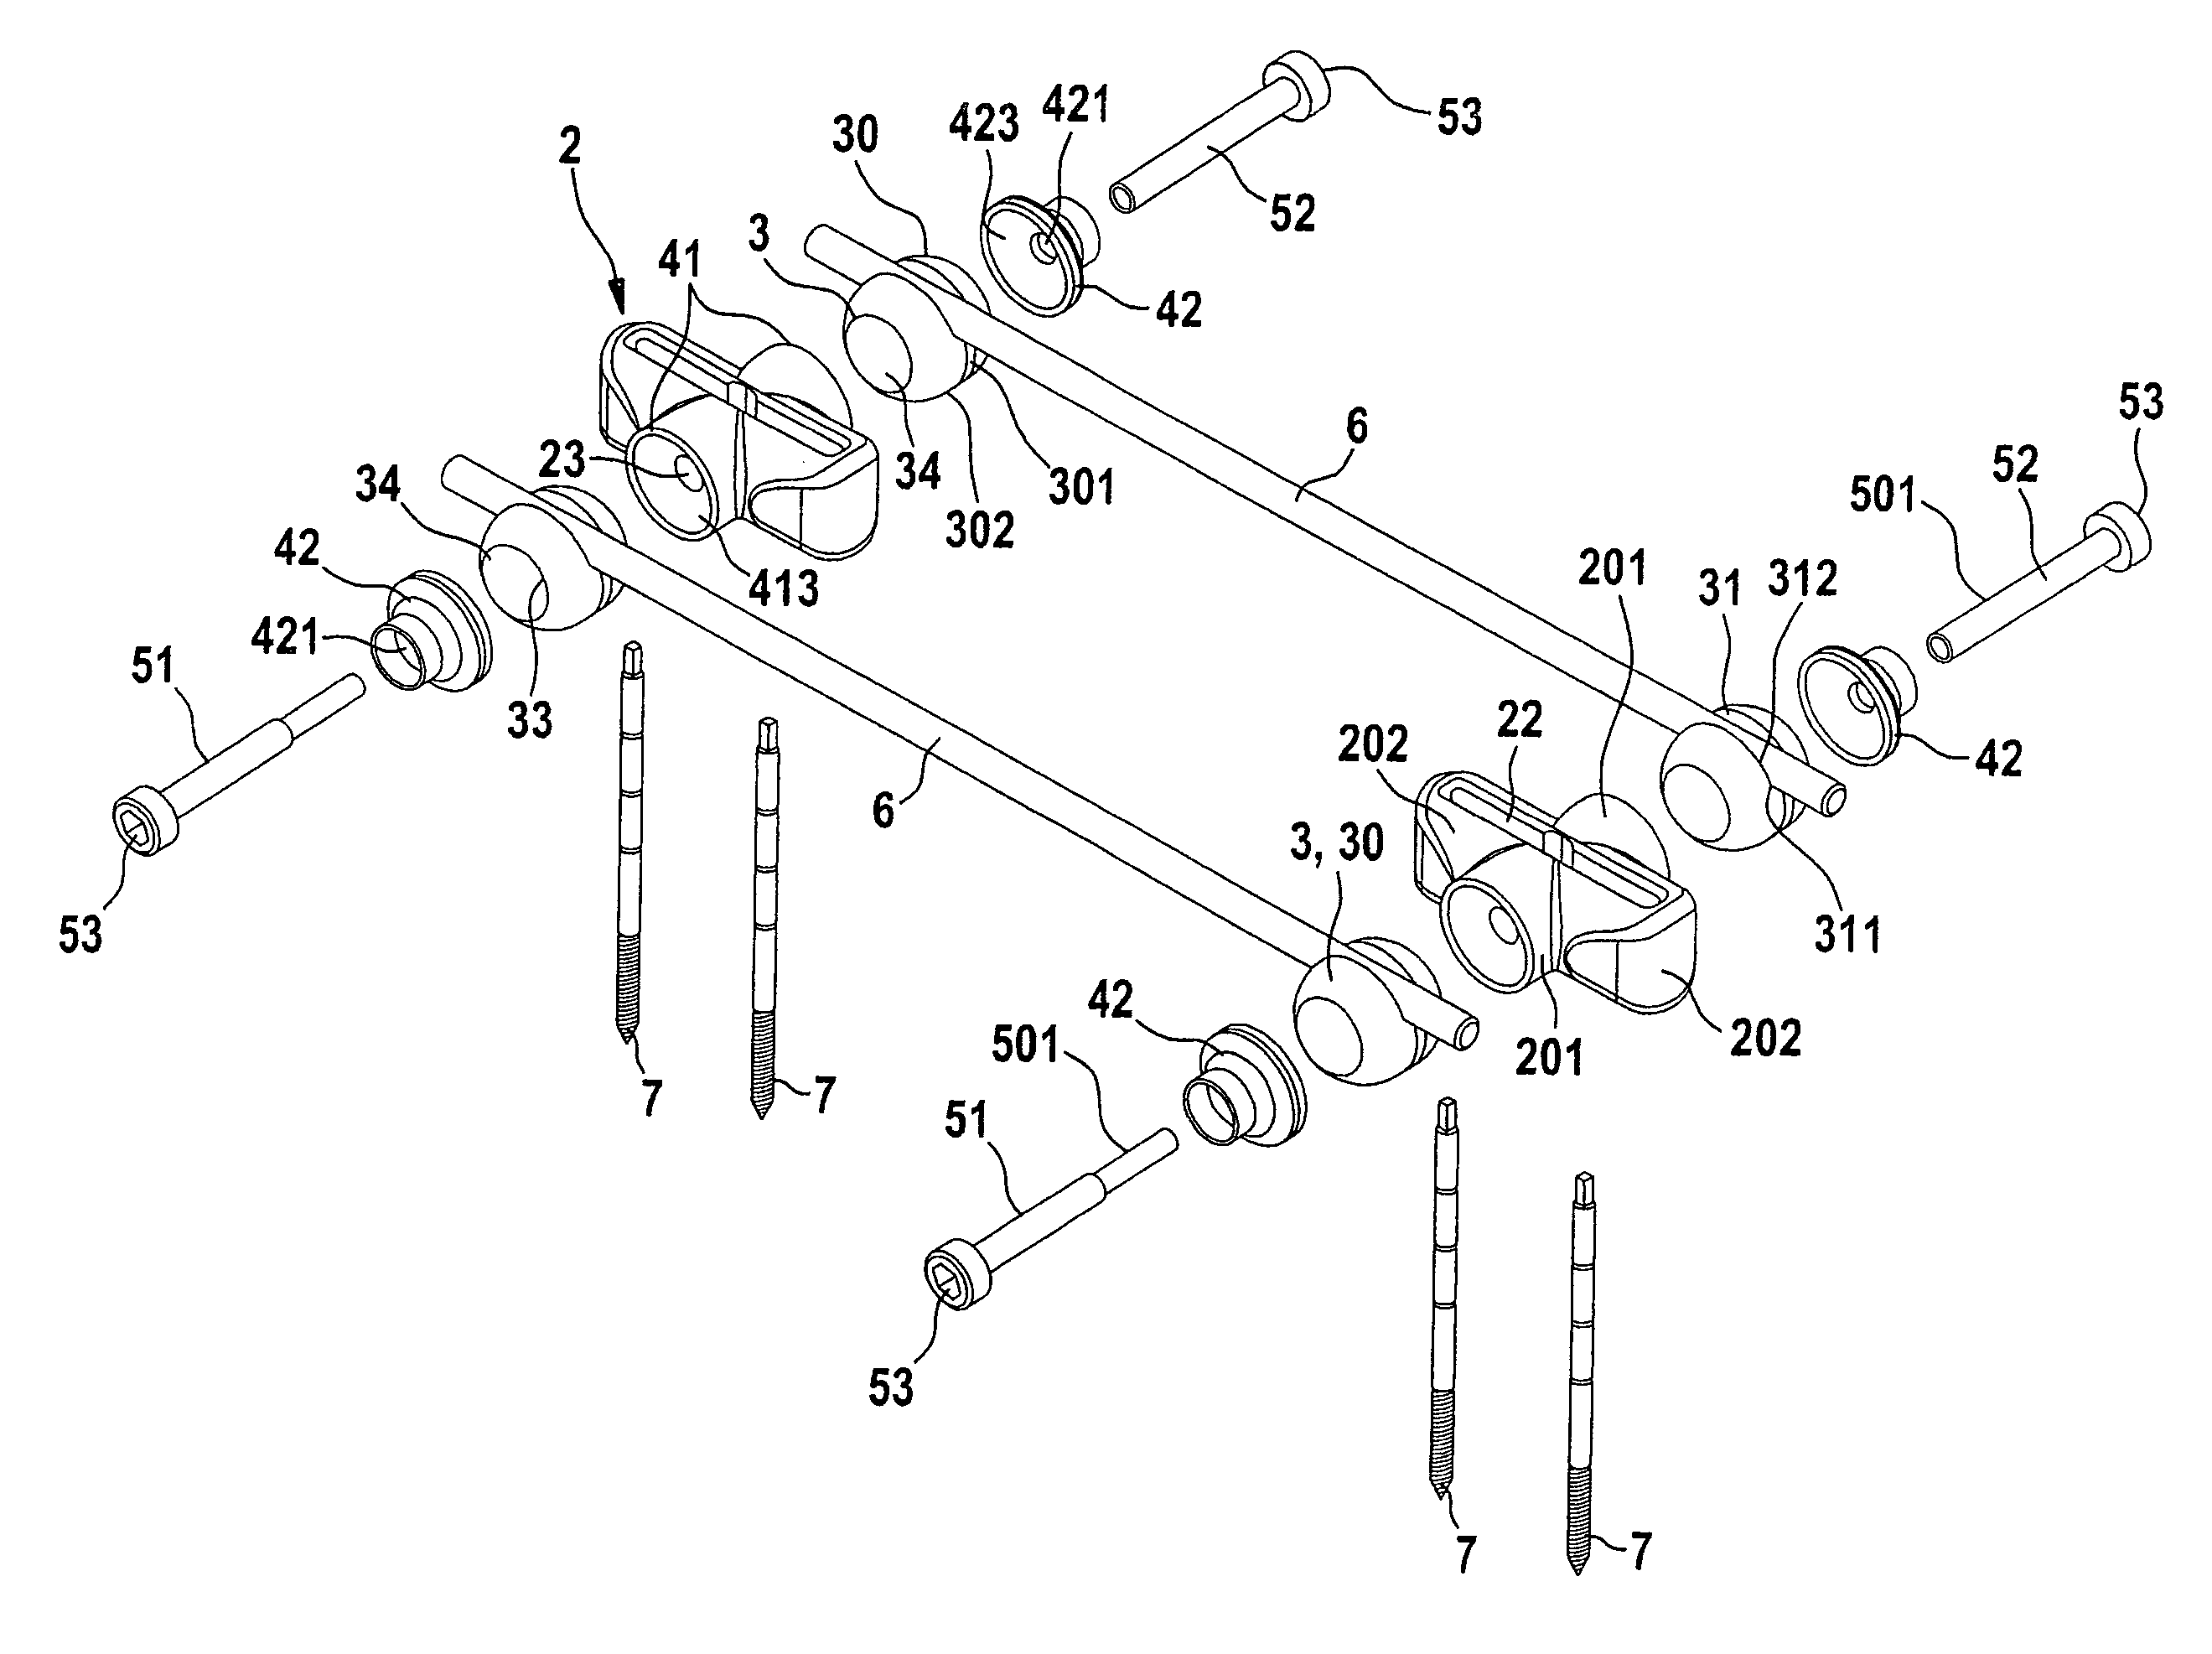 Fixation device for stably interlinking at least two bone fragments of a broken bone and corresponding fixation element and kit